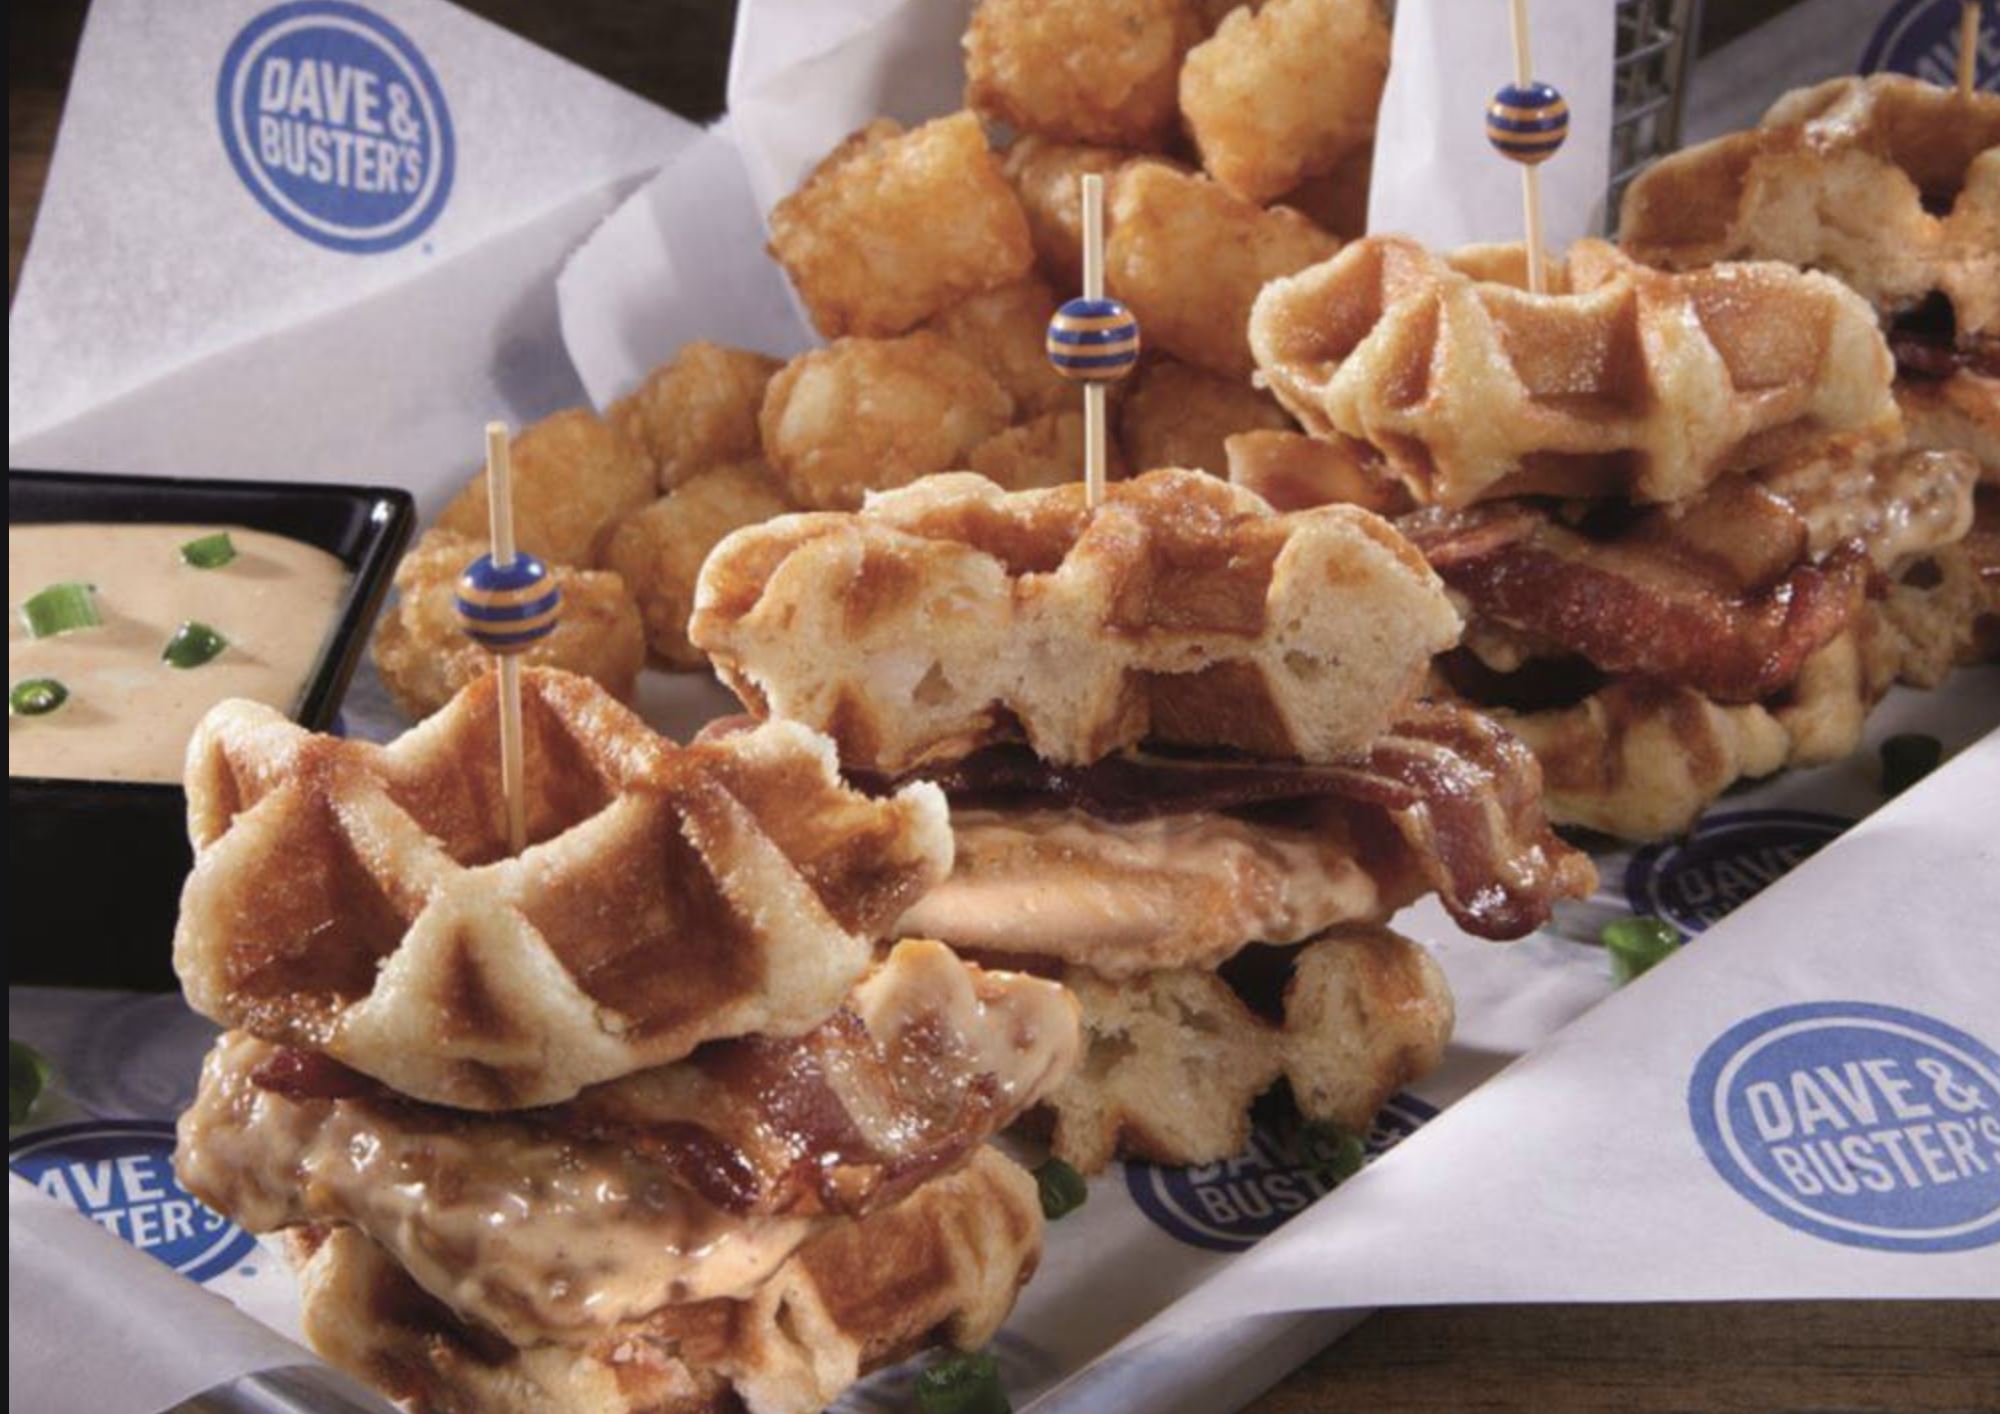 Restaurant review: It's Dave & Buster's, really, what did I expect?